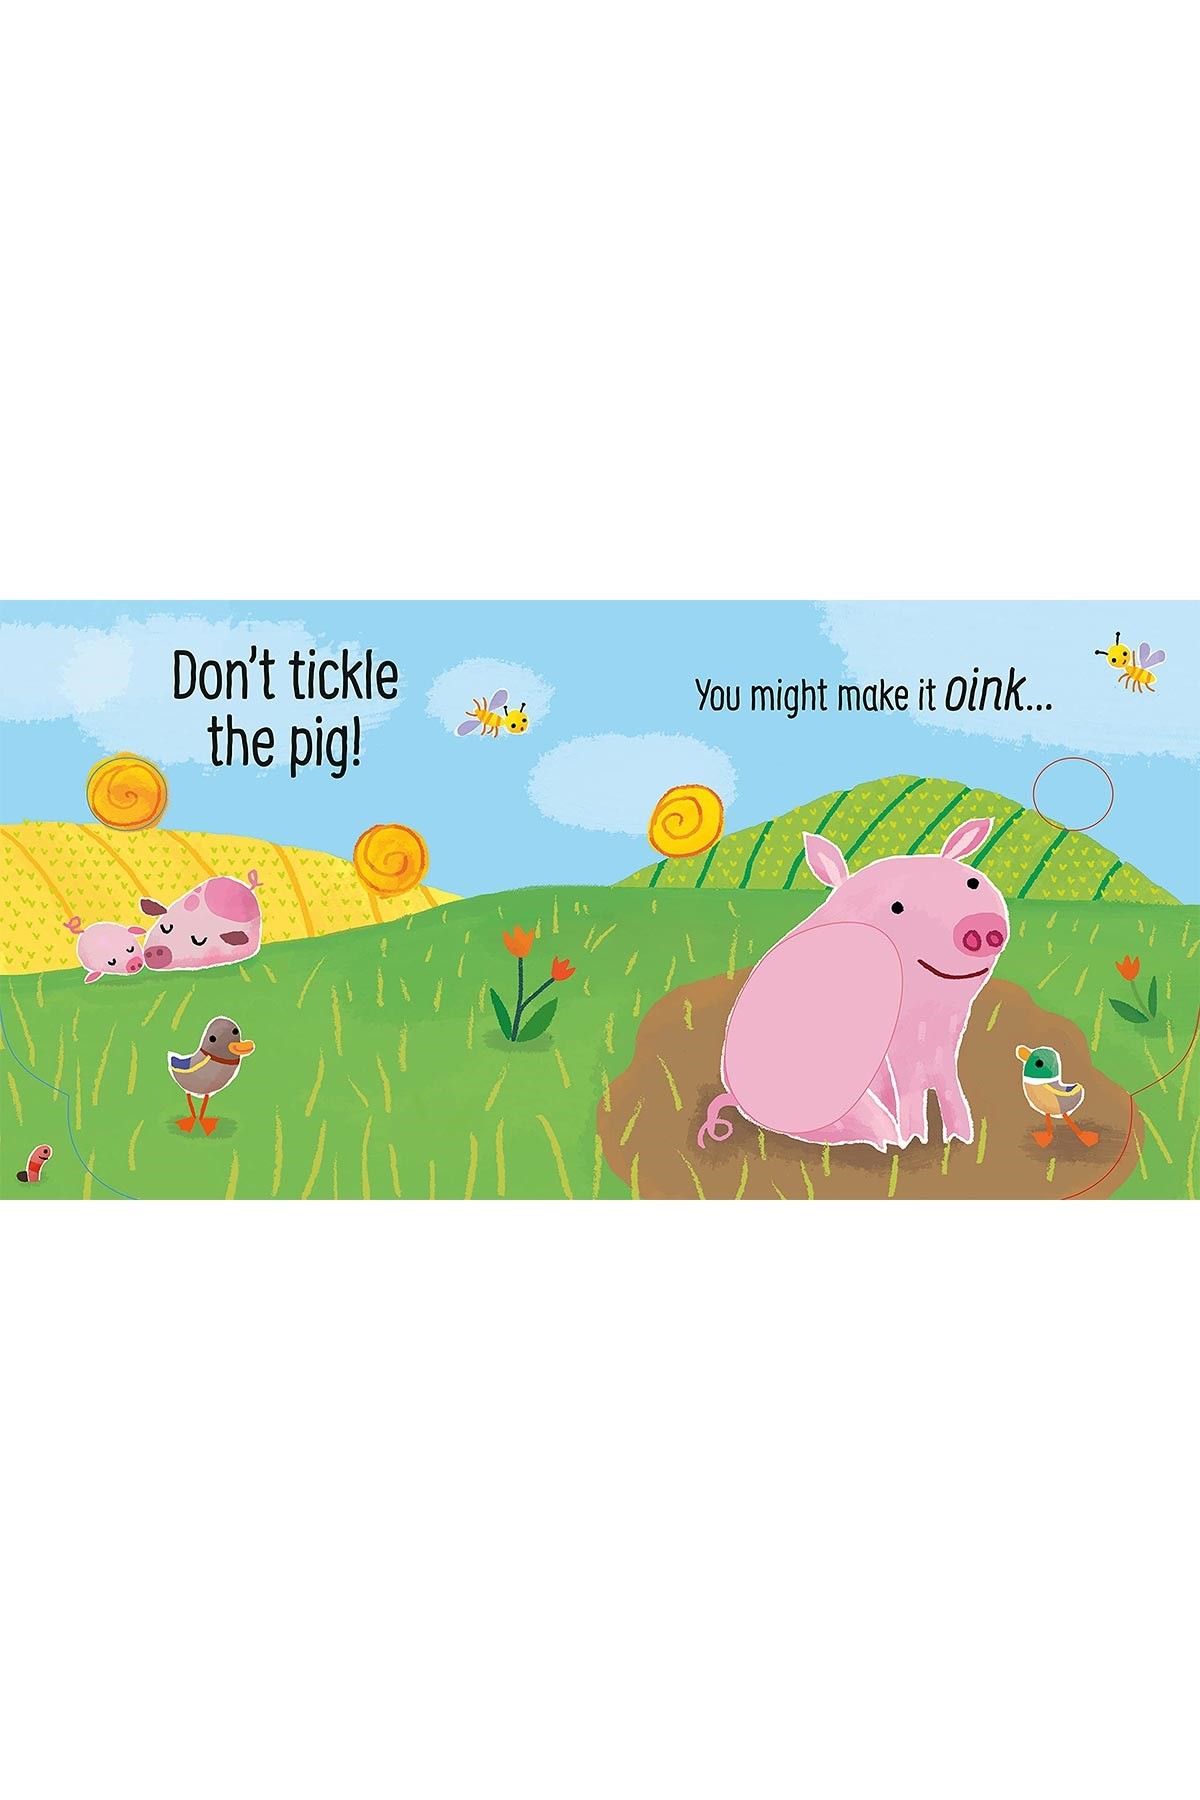 The Usborne Don't tickle the Pig!